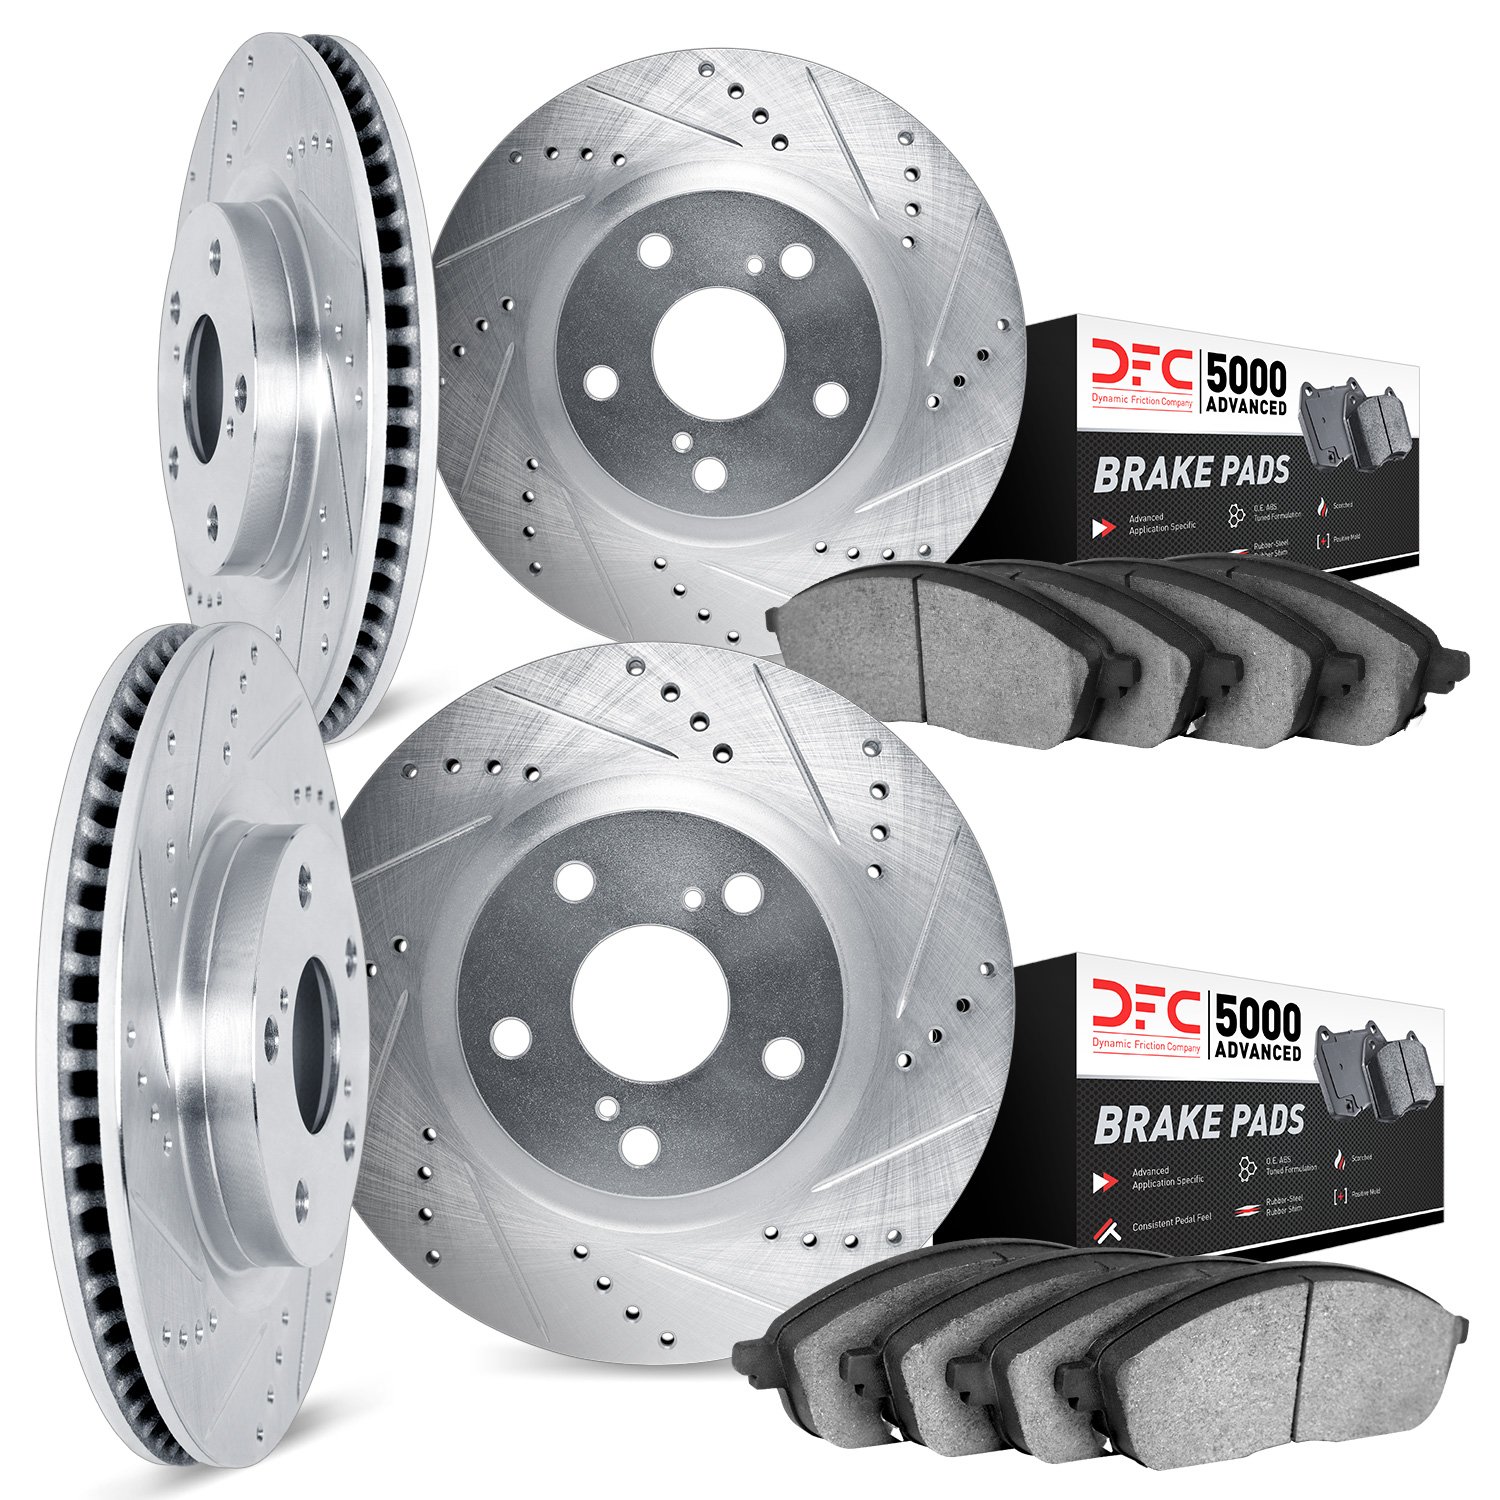 7504-54300 Drilled/Slotted Brake Rotors w/5000 Advanced Brake Pads Kit [Silver], 2004-2007 Ford/Lincoln/Mercury/Mazda, Position: